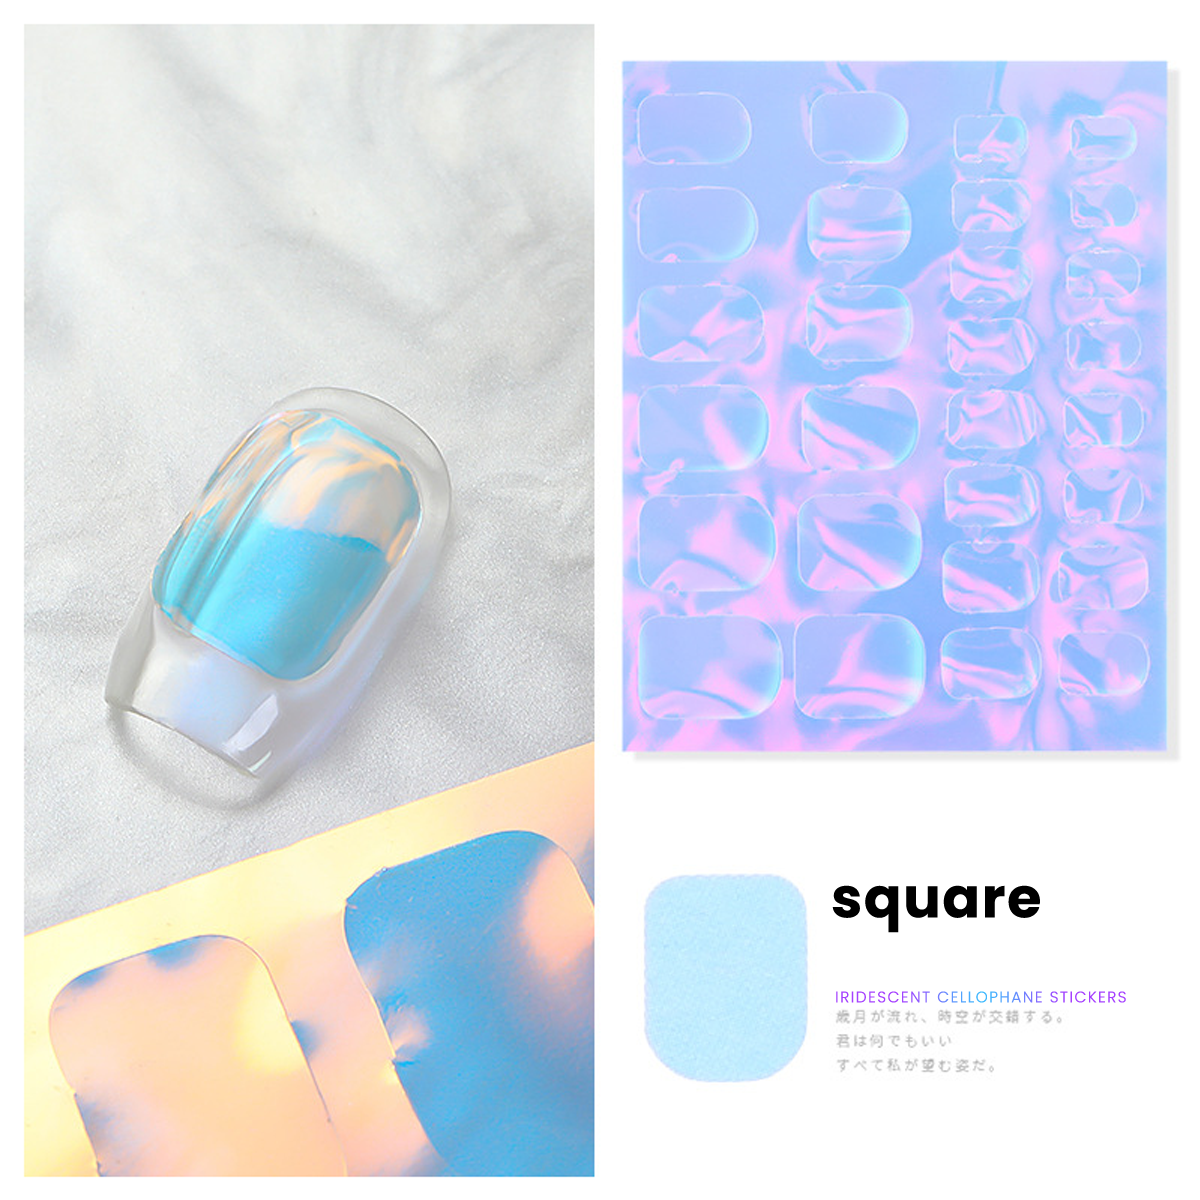 Square Iridescent Cellophane Nail Stickers 